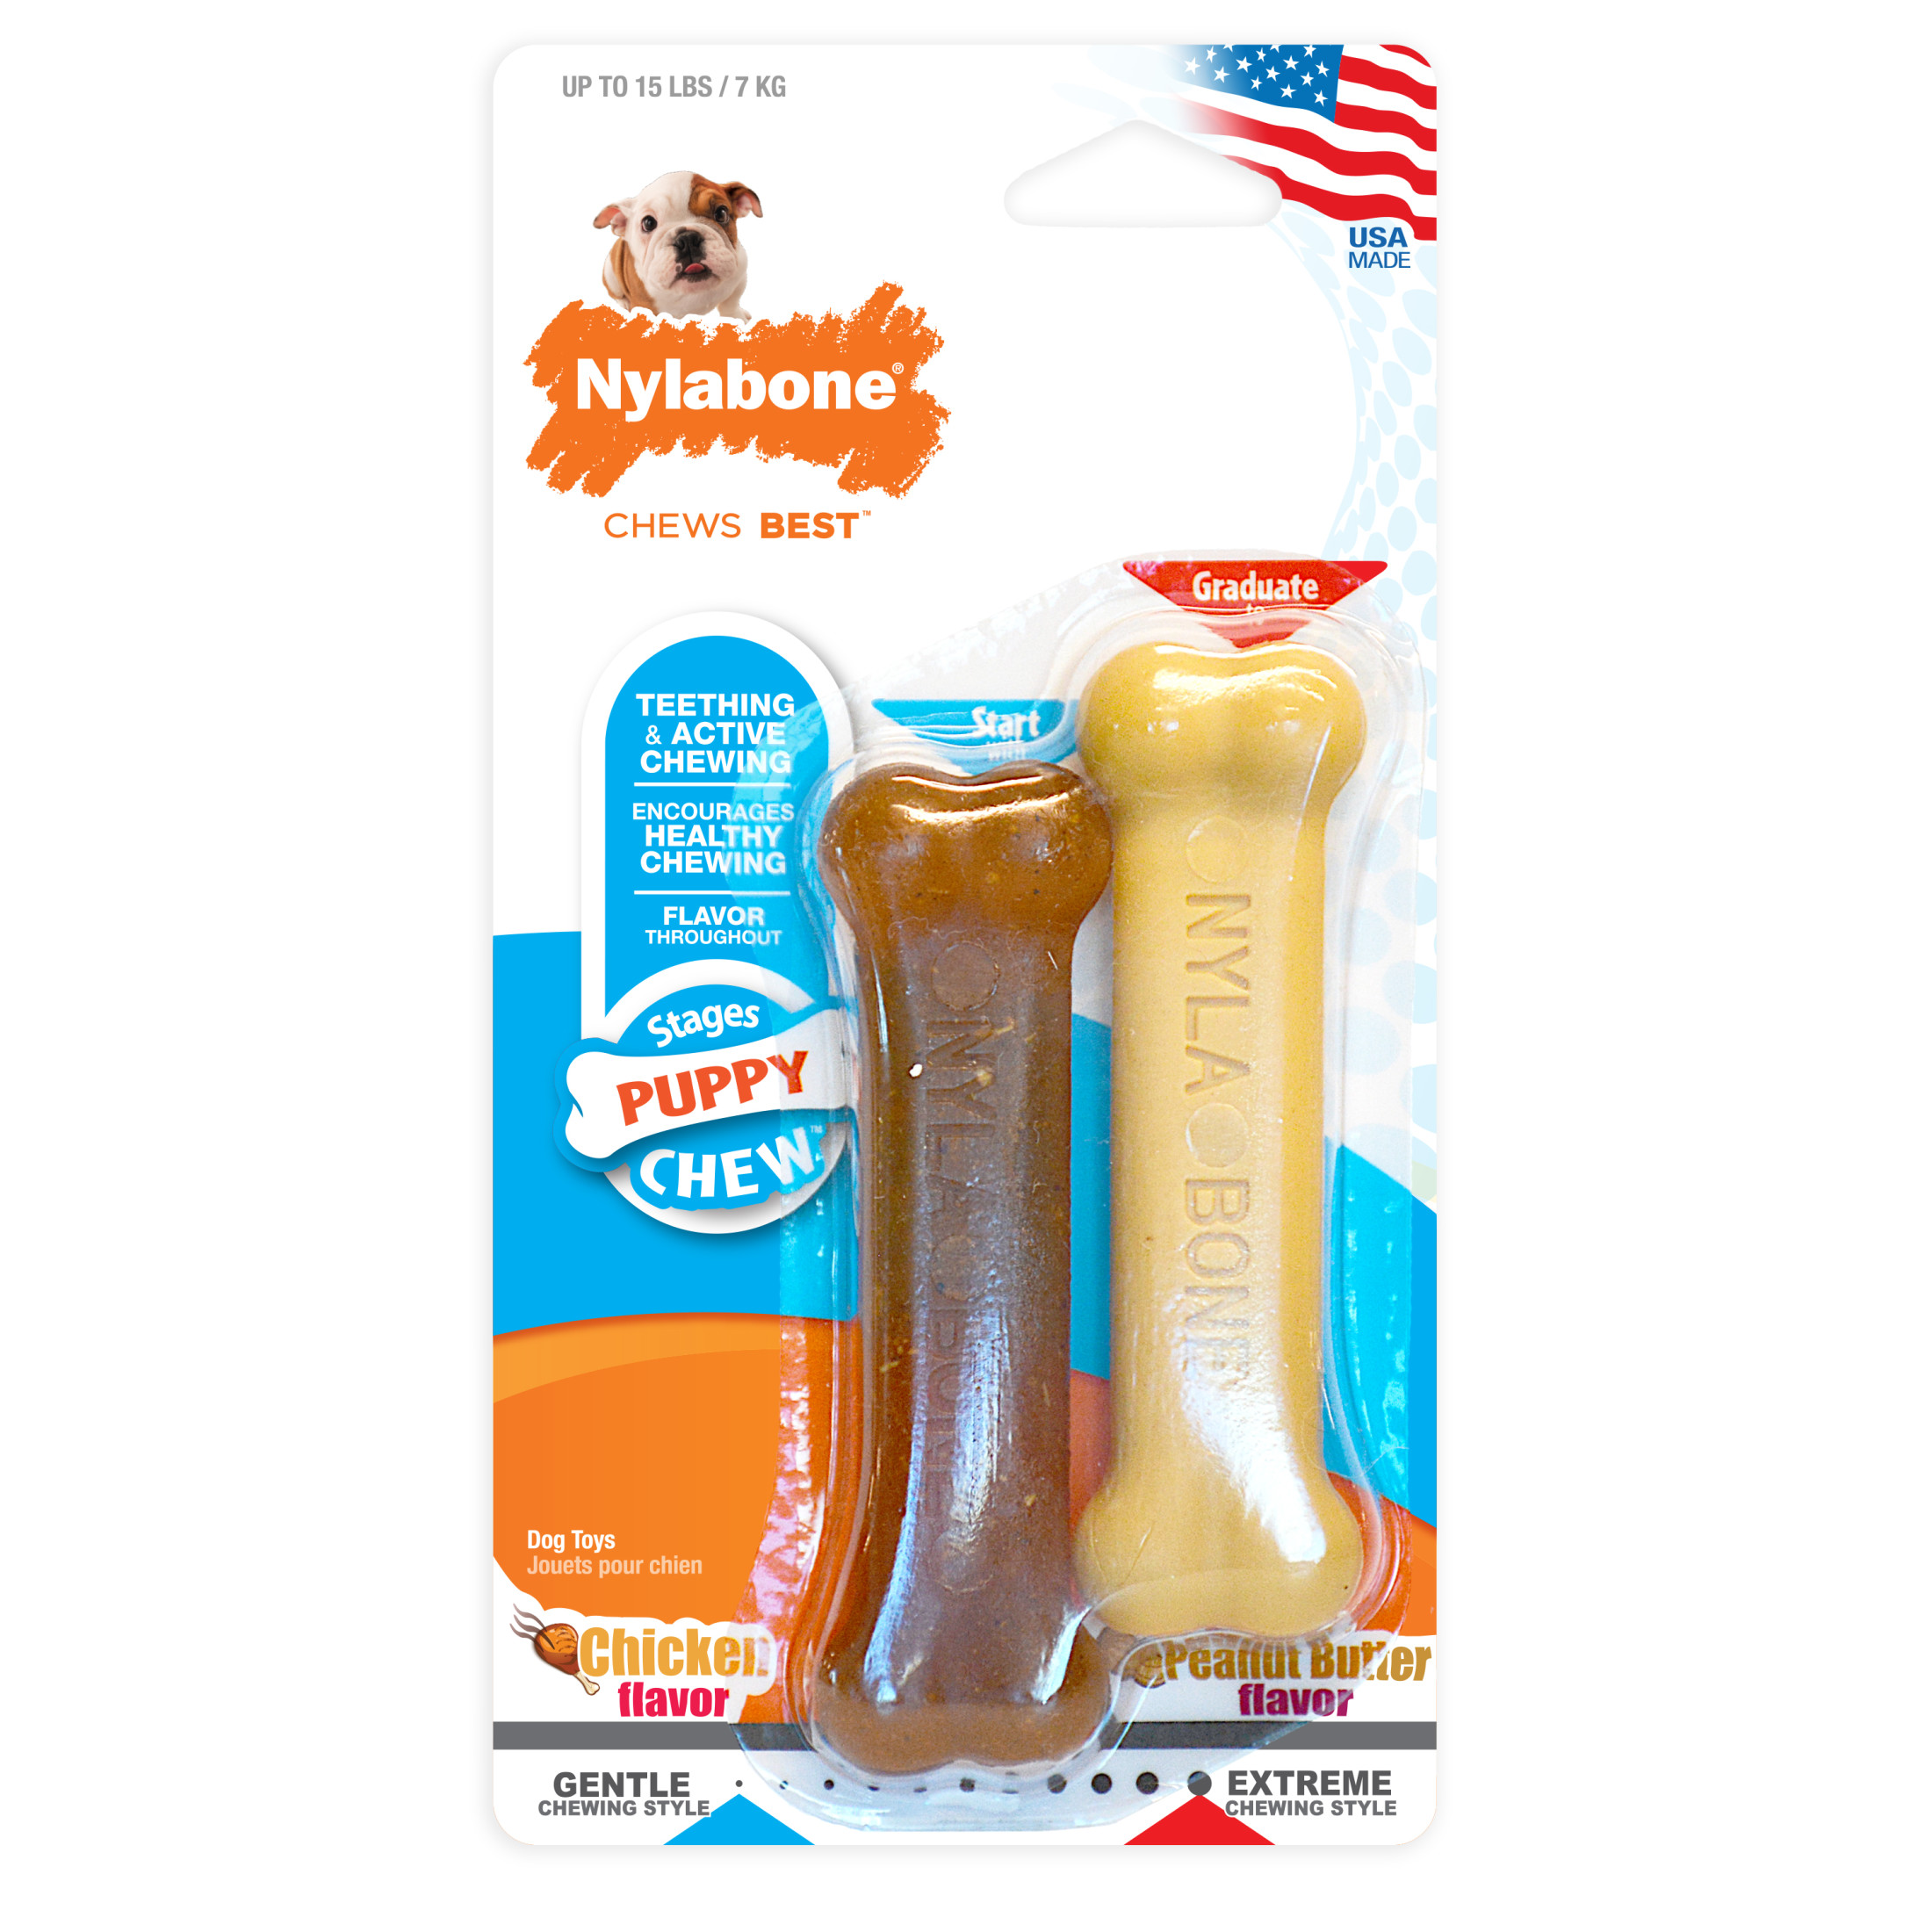 Nylabone Classic Puppy Chew Flavored Durable Dog Chew Toy Chicken & Peanut Butter Bone X-Small/Petite - Up to 15 lbs. (2 Count) - image 1 of 11